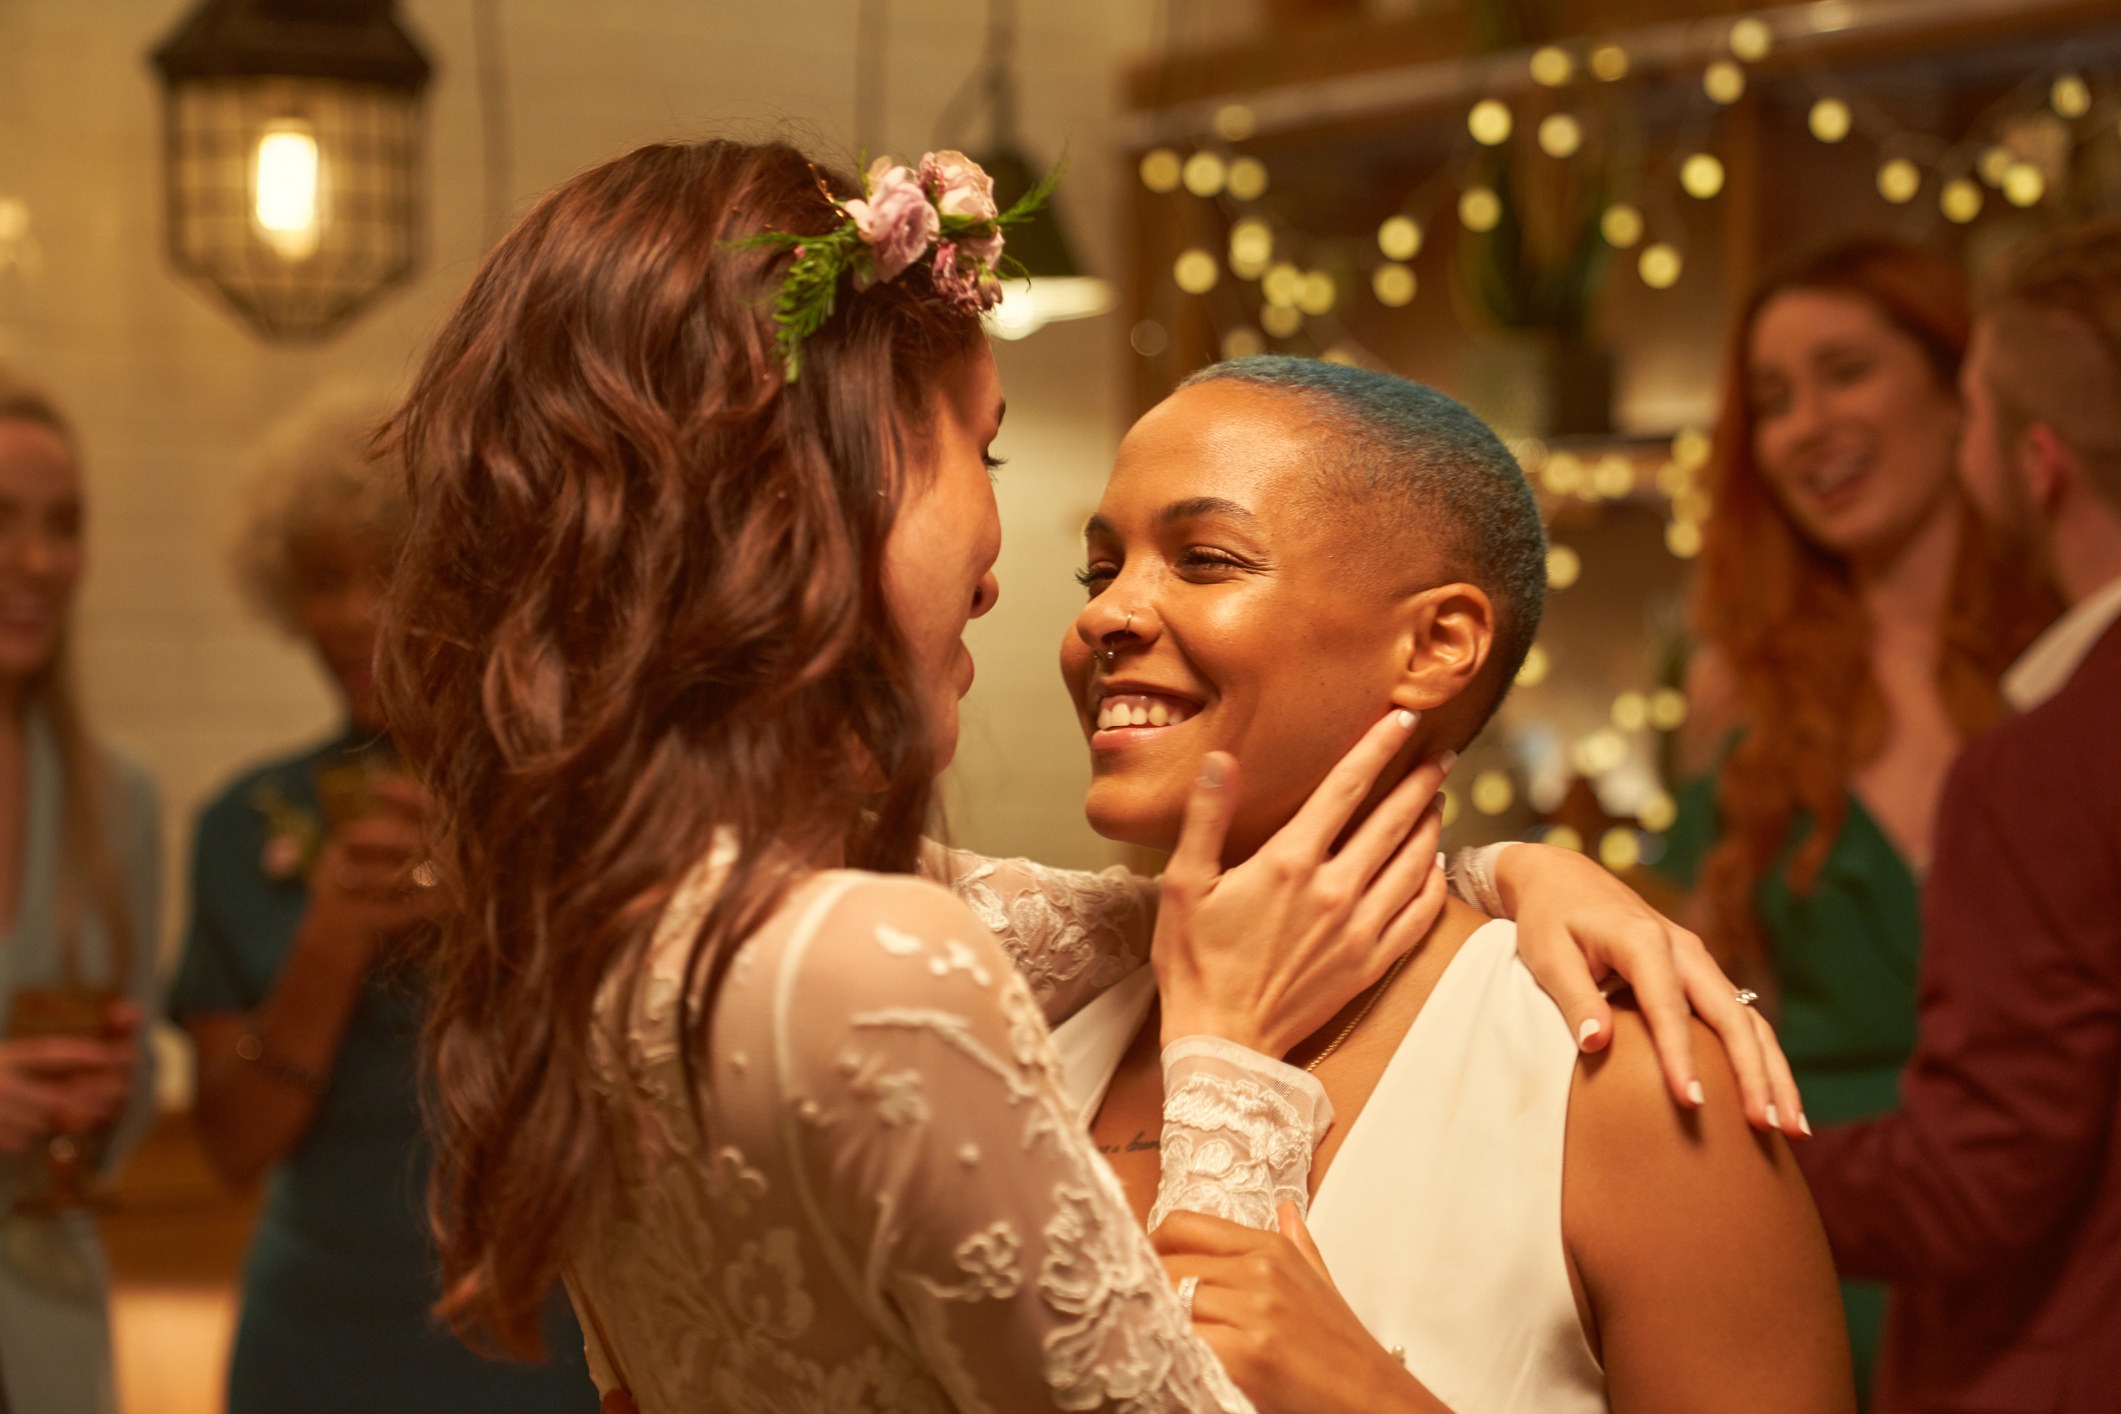 Two women embrace at their wedding party